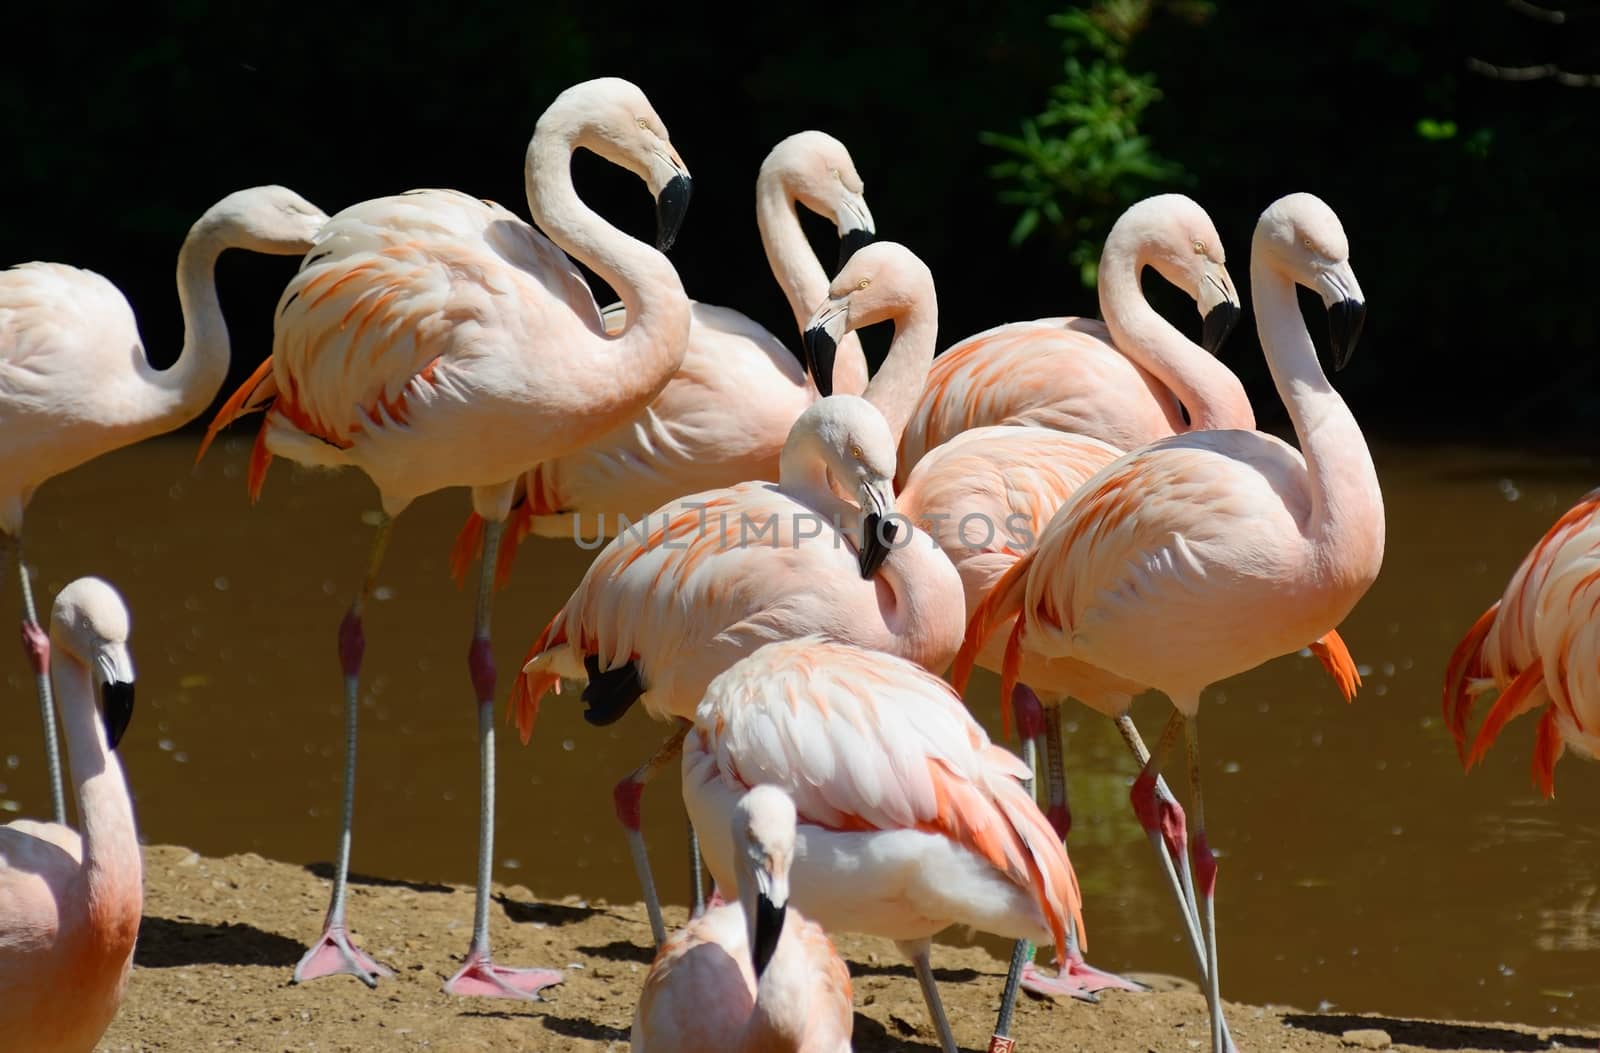 Flamingos on a sunny day by a lake looking colorful and vibrant